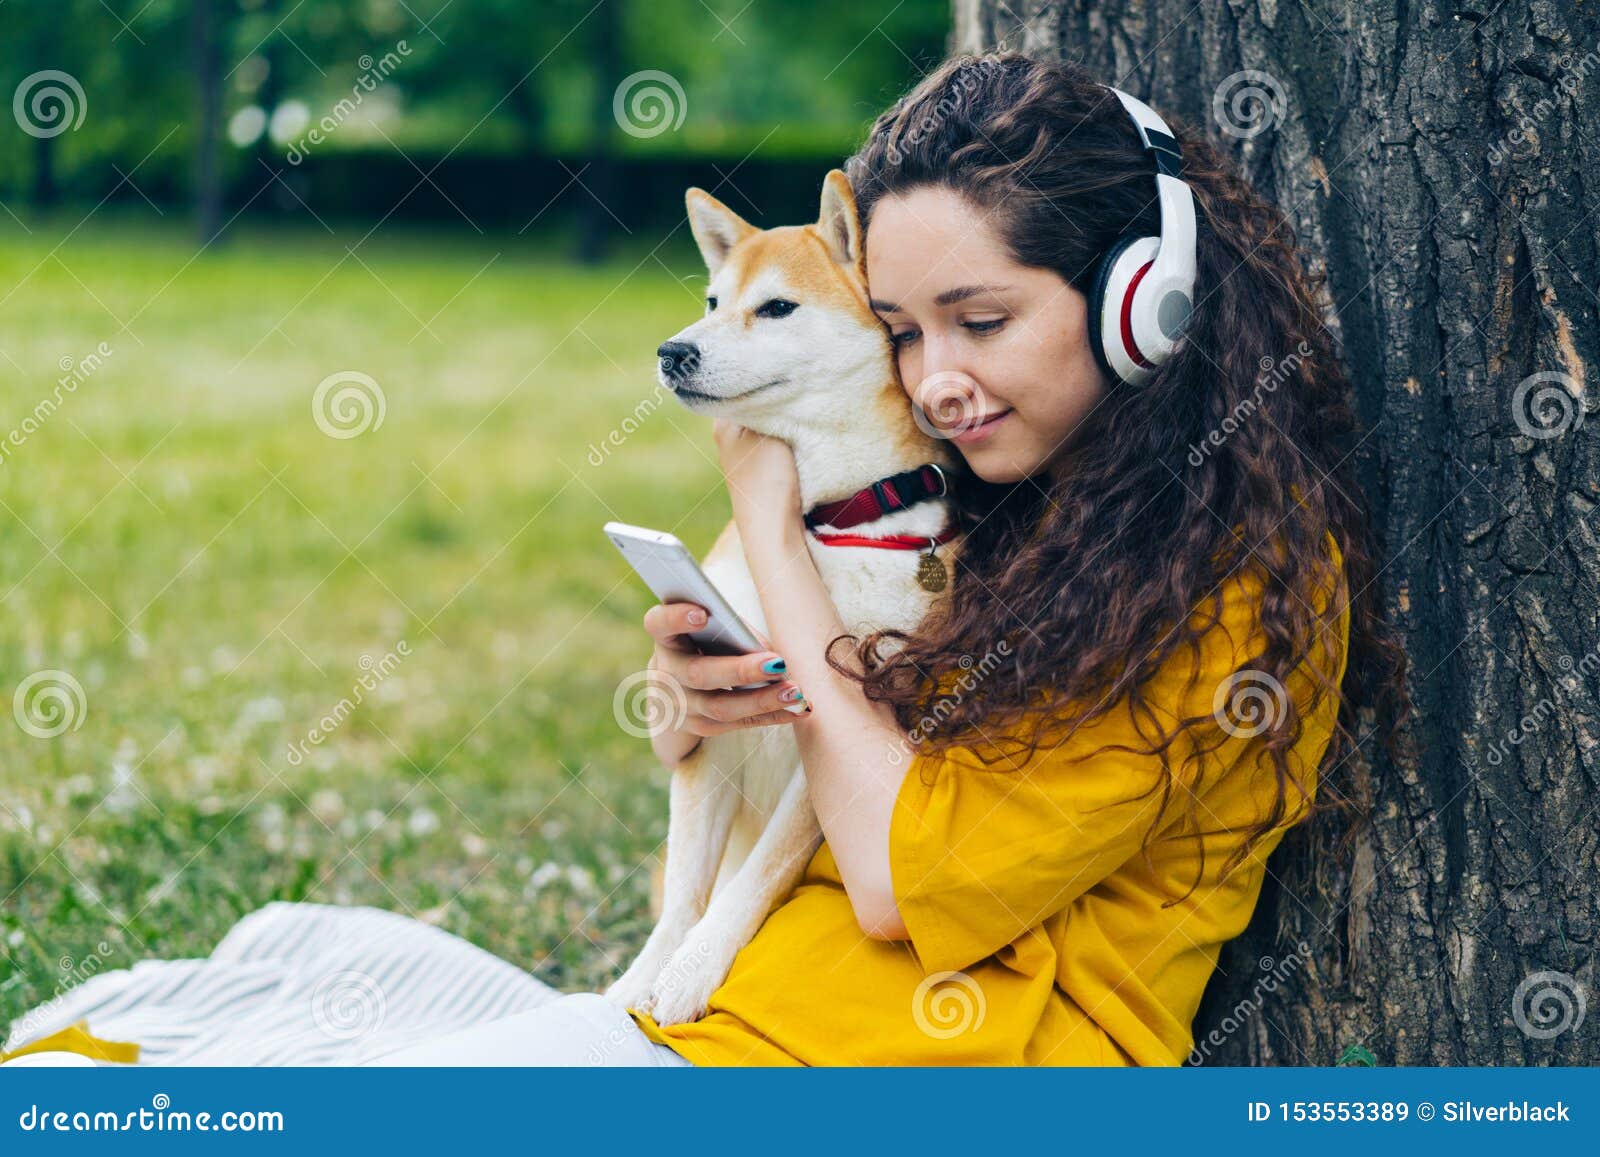 Smiling student enjoying music in headphones using smartphone in park with dog. Smiling student attractive girl is enjoying pop music in headphones using smartphone sitting on lawn in park with beautiful shiba inu dog. People and pets concept.